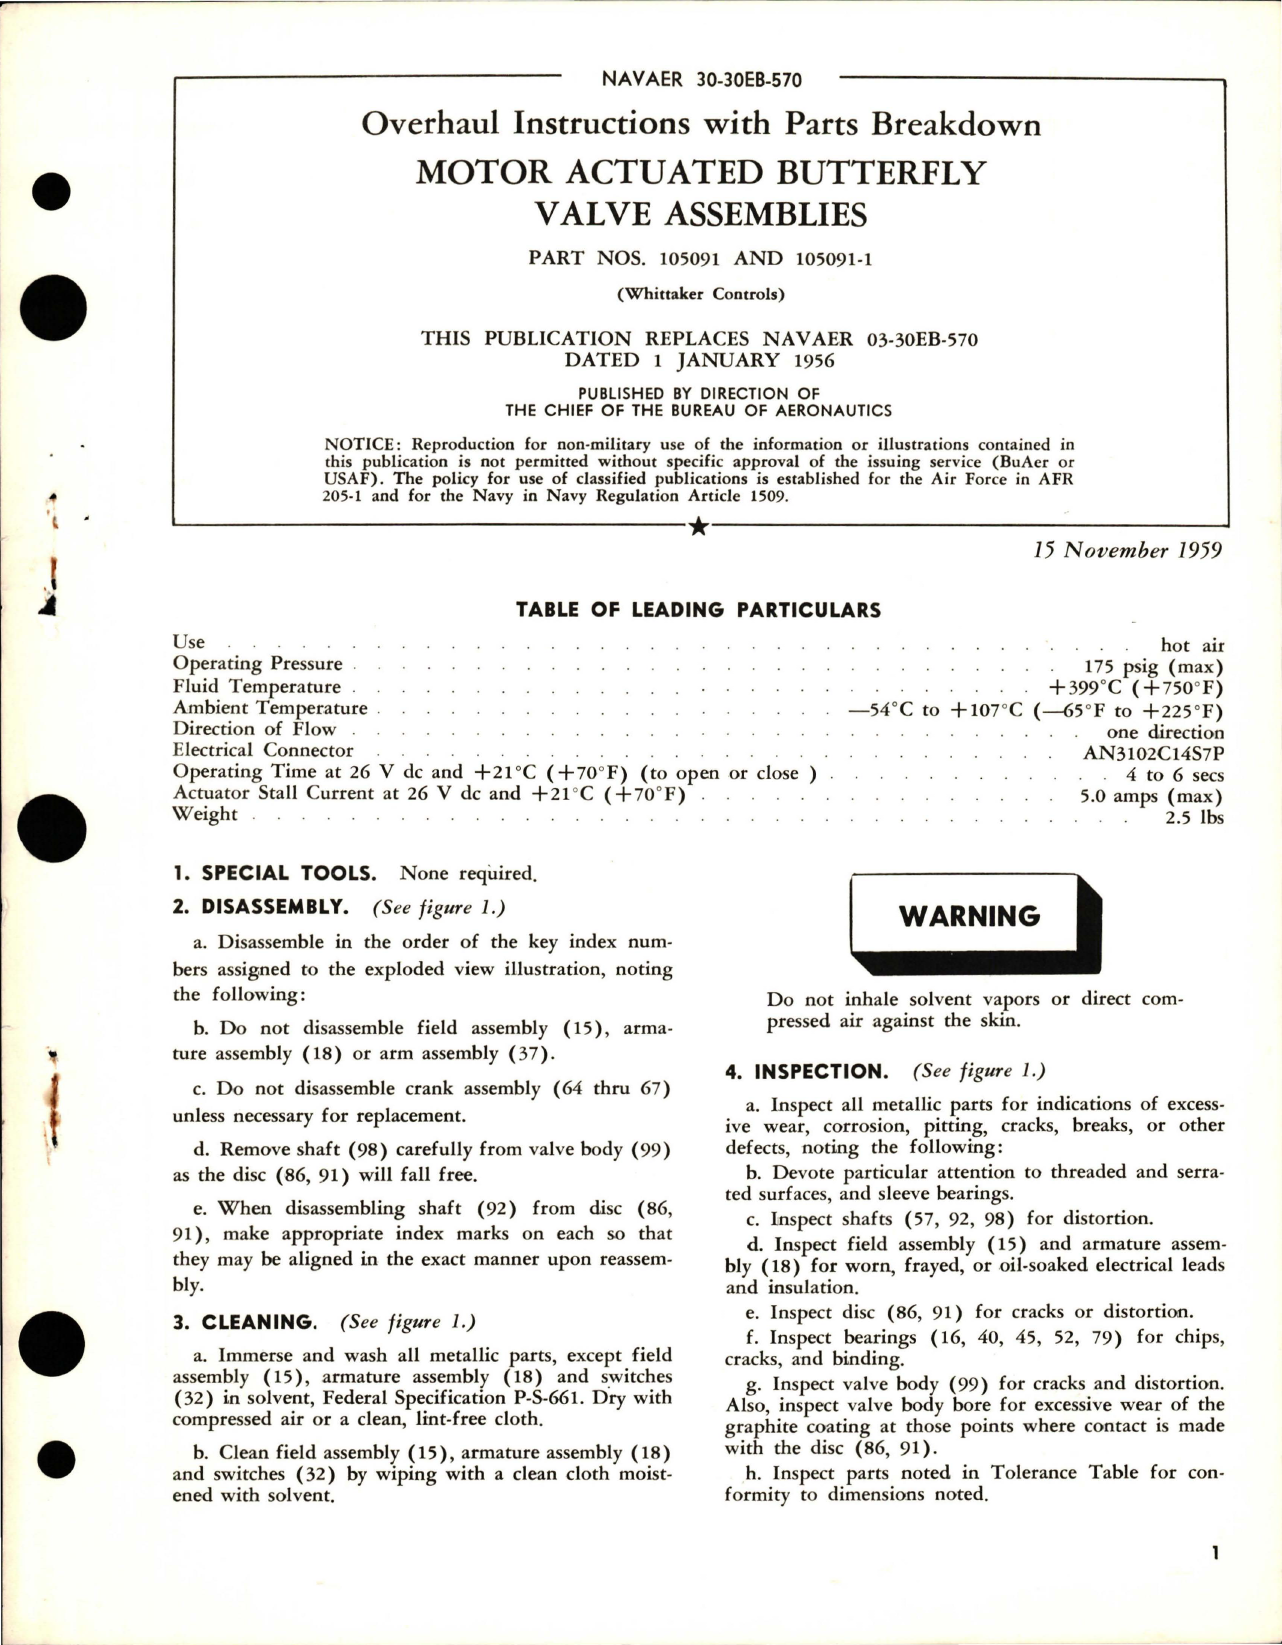 Sample page 1 from AirCorps Library document: Overhaul Instructions with Parts for Motor Actuated Butterfly Valve Assemblies - Part 105091 and 105091-1